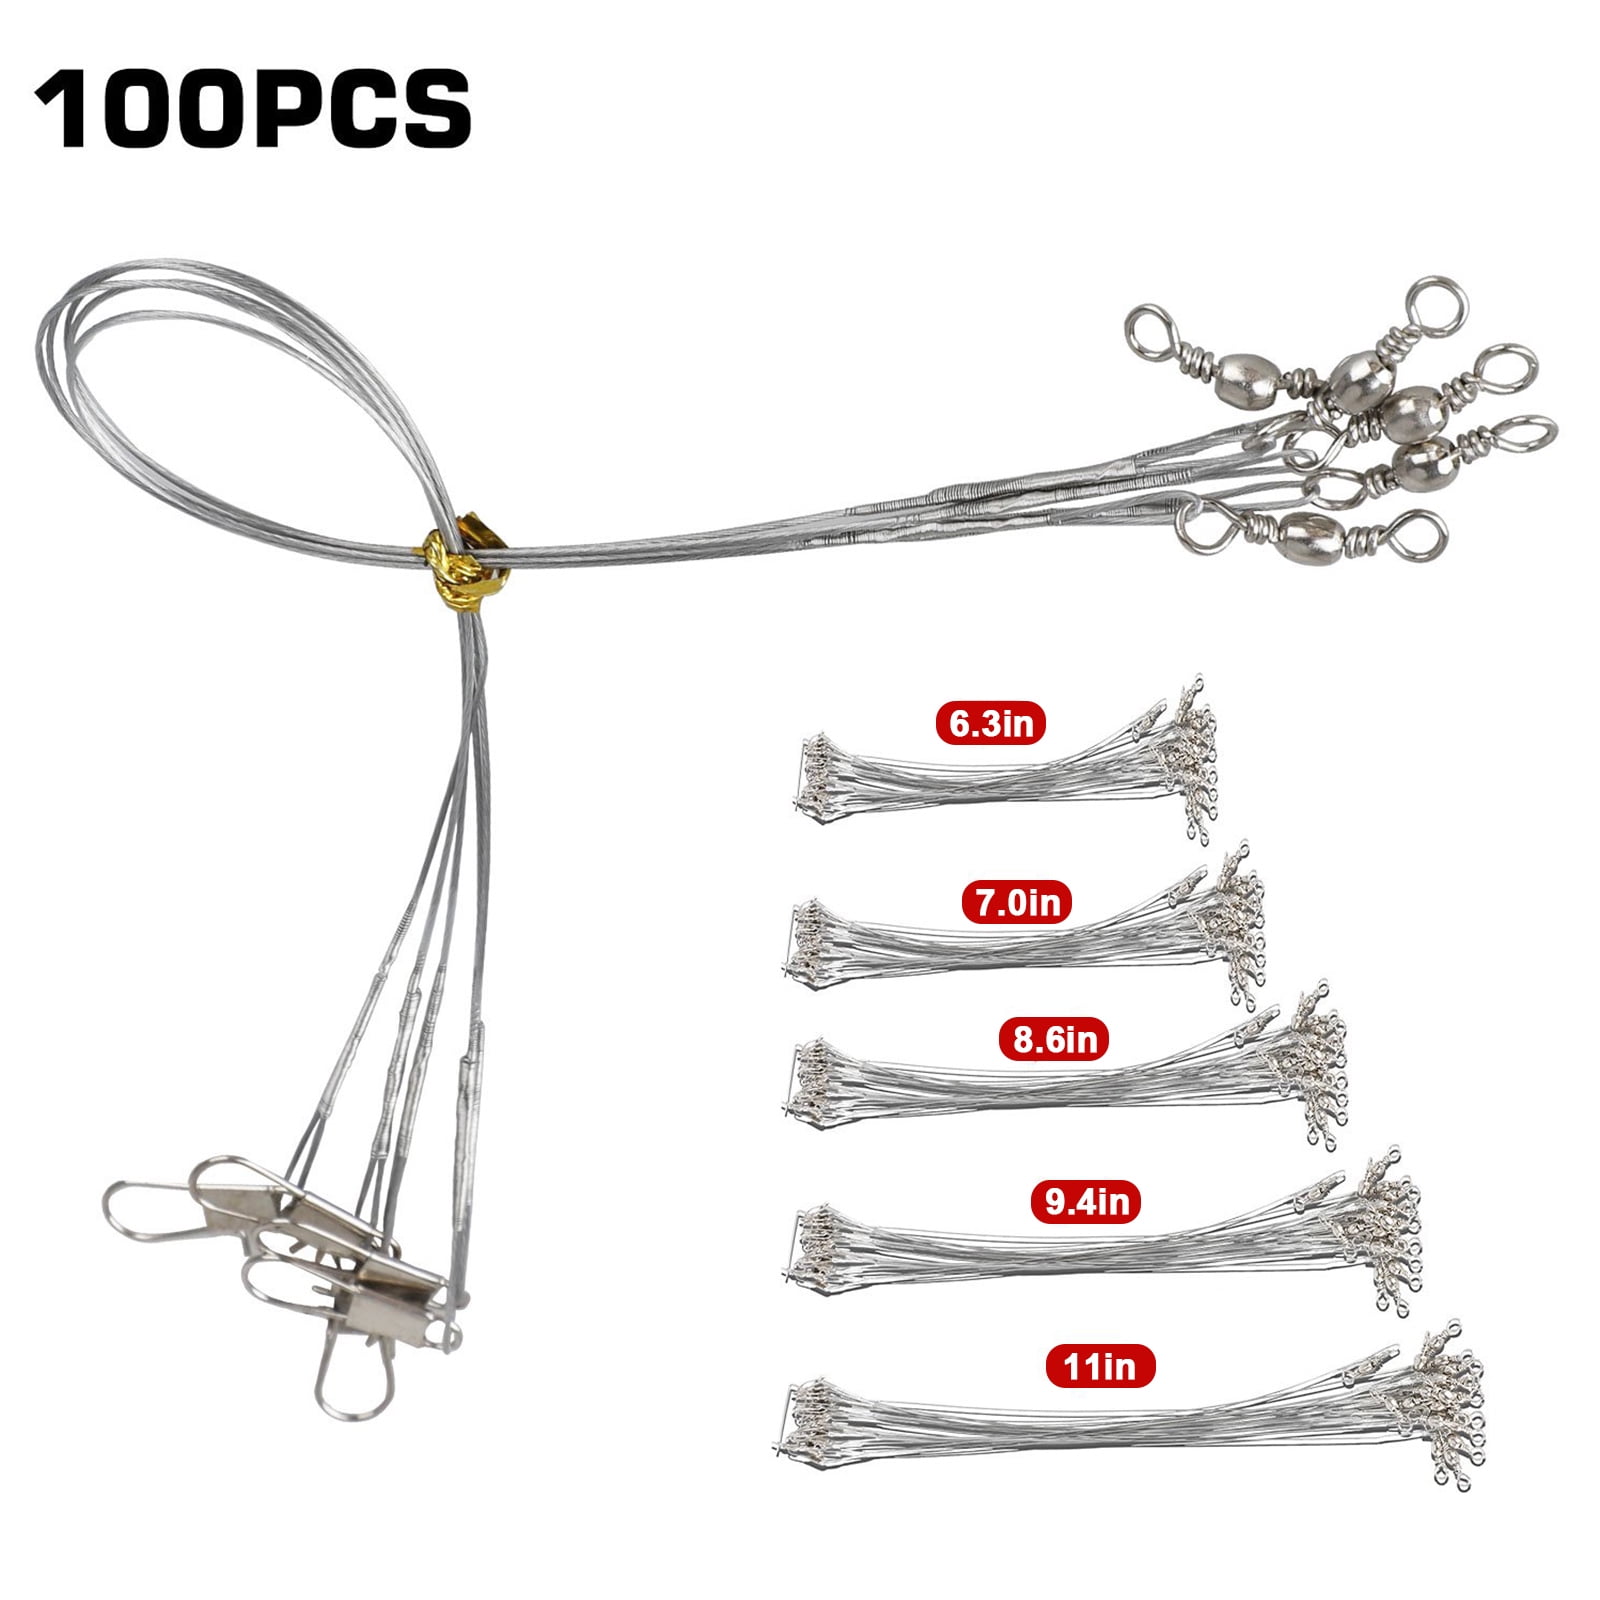 10PCS Fishing leader Line with Fluorescent beads Balance 3 Way Steel wire  Leader Cross Line Jig